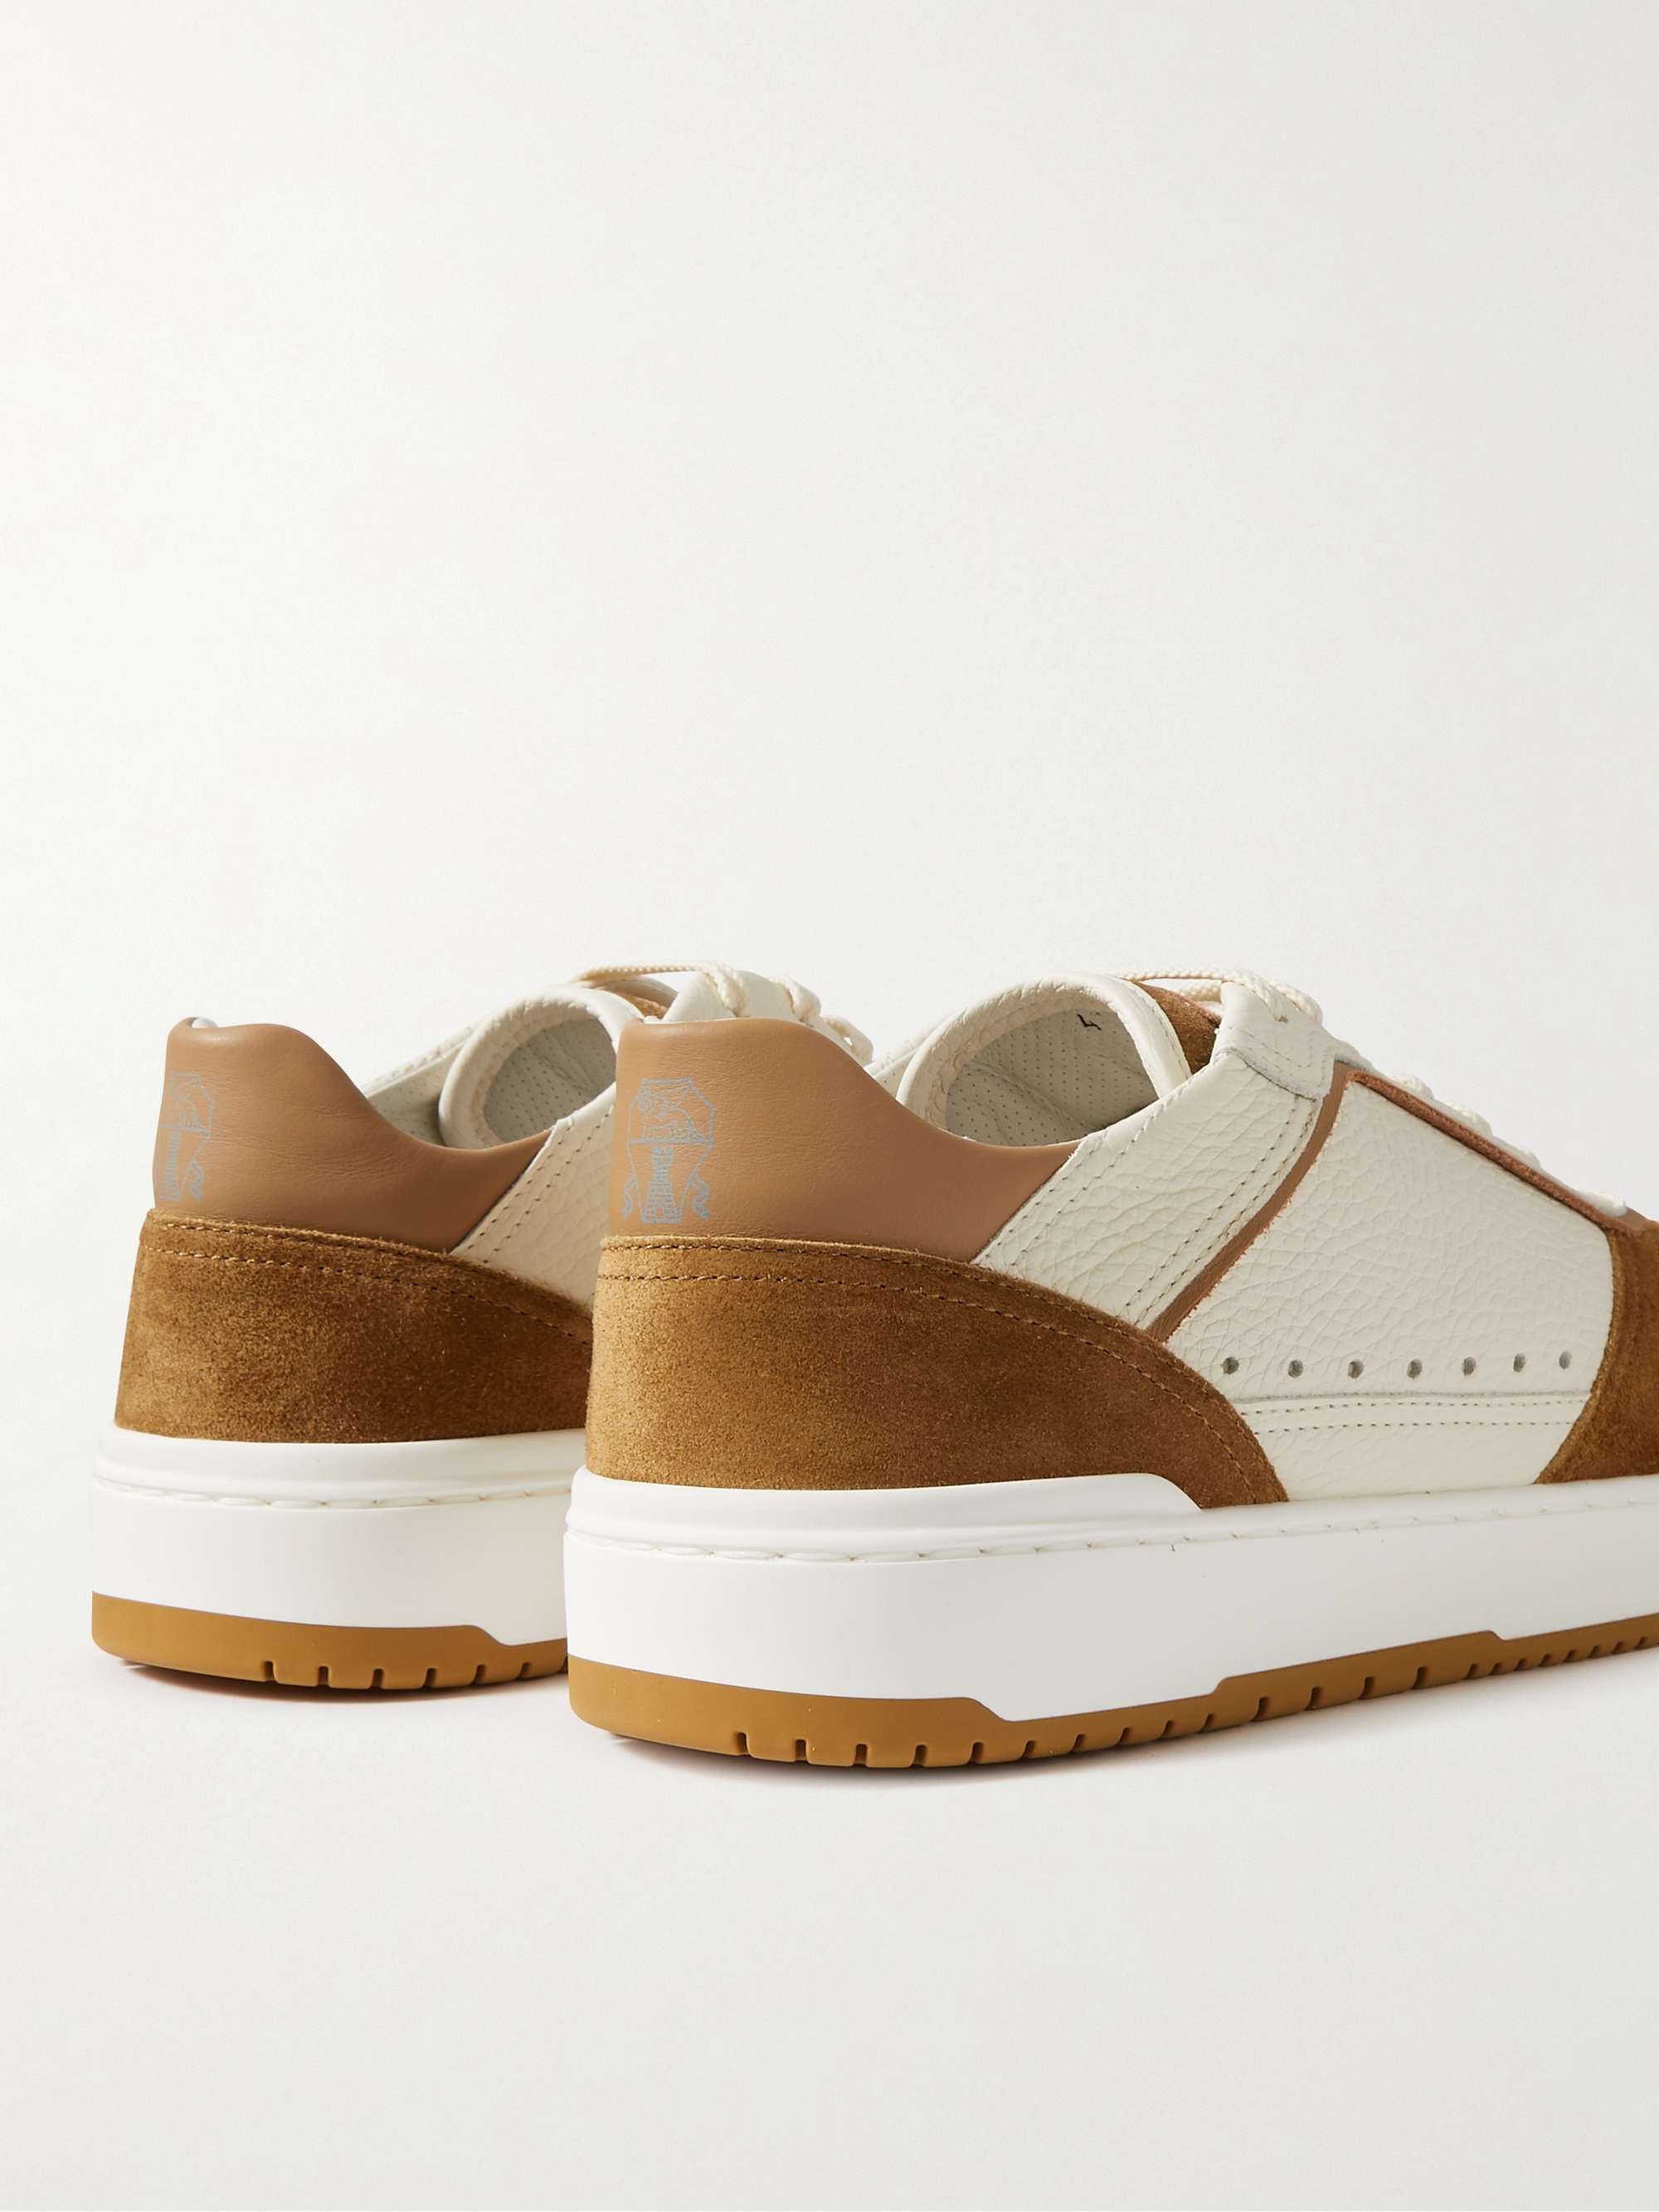 BRUNELLO CUCINELLI Suede-Trimmed Full-Grain Leather Sneakers